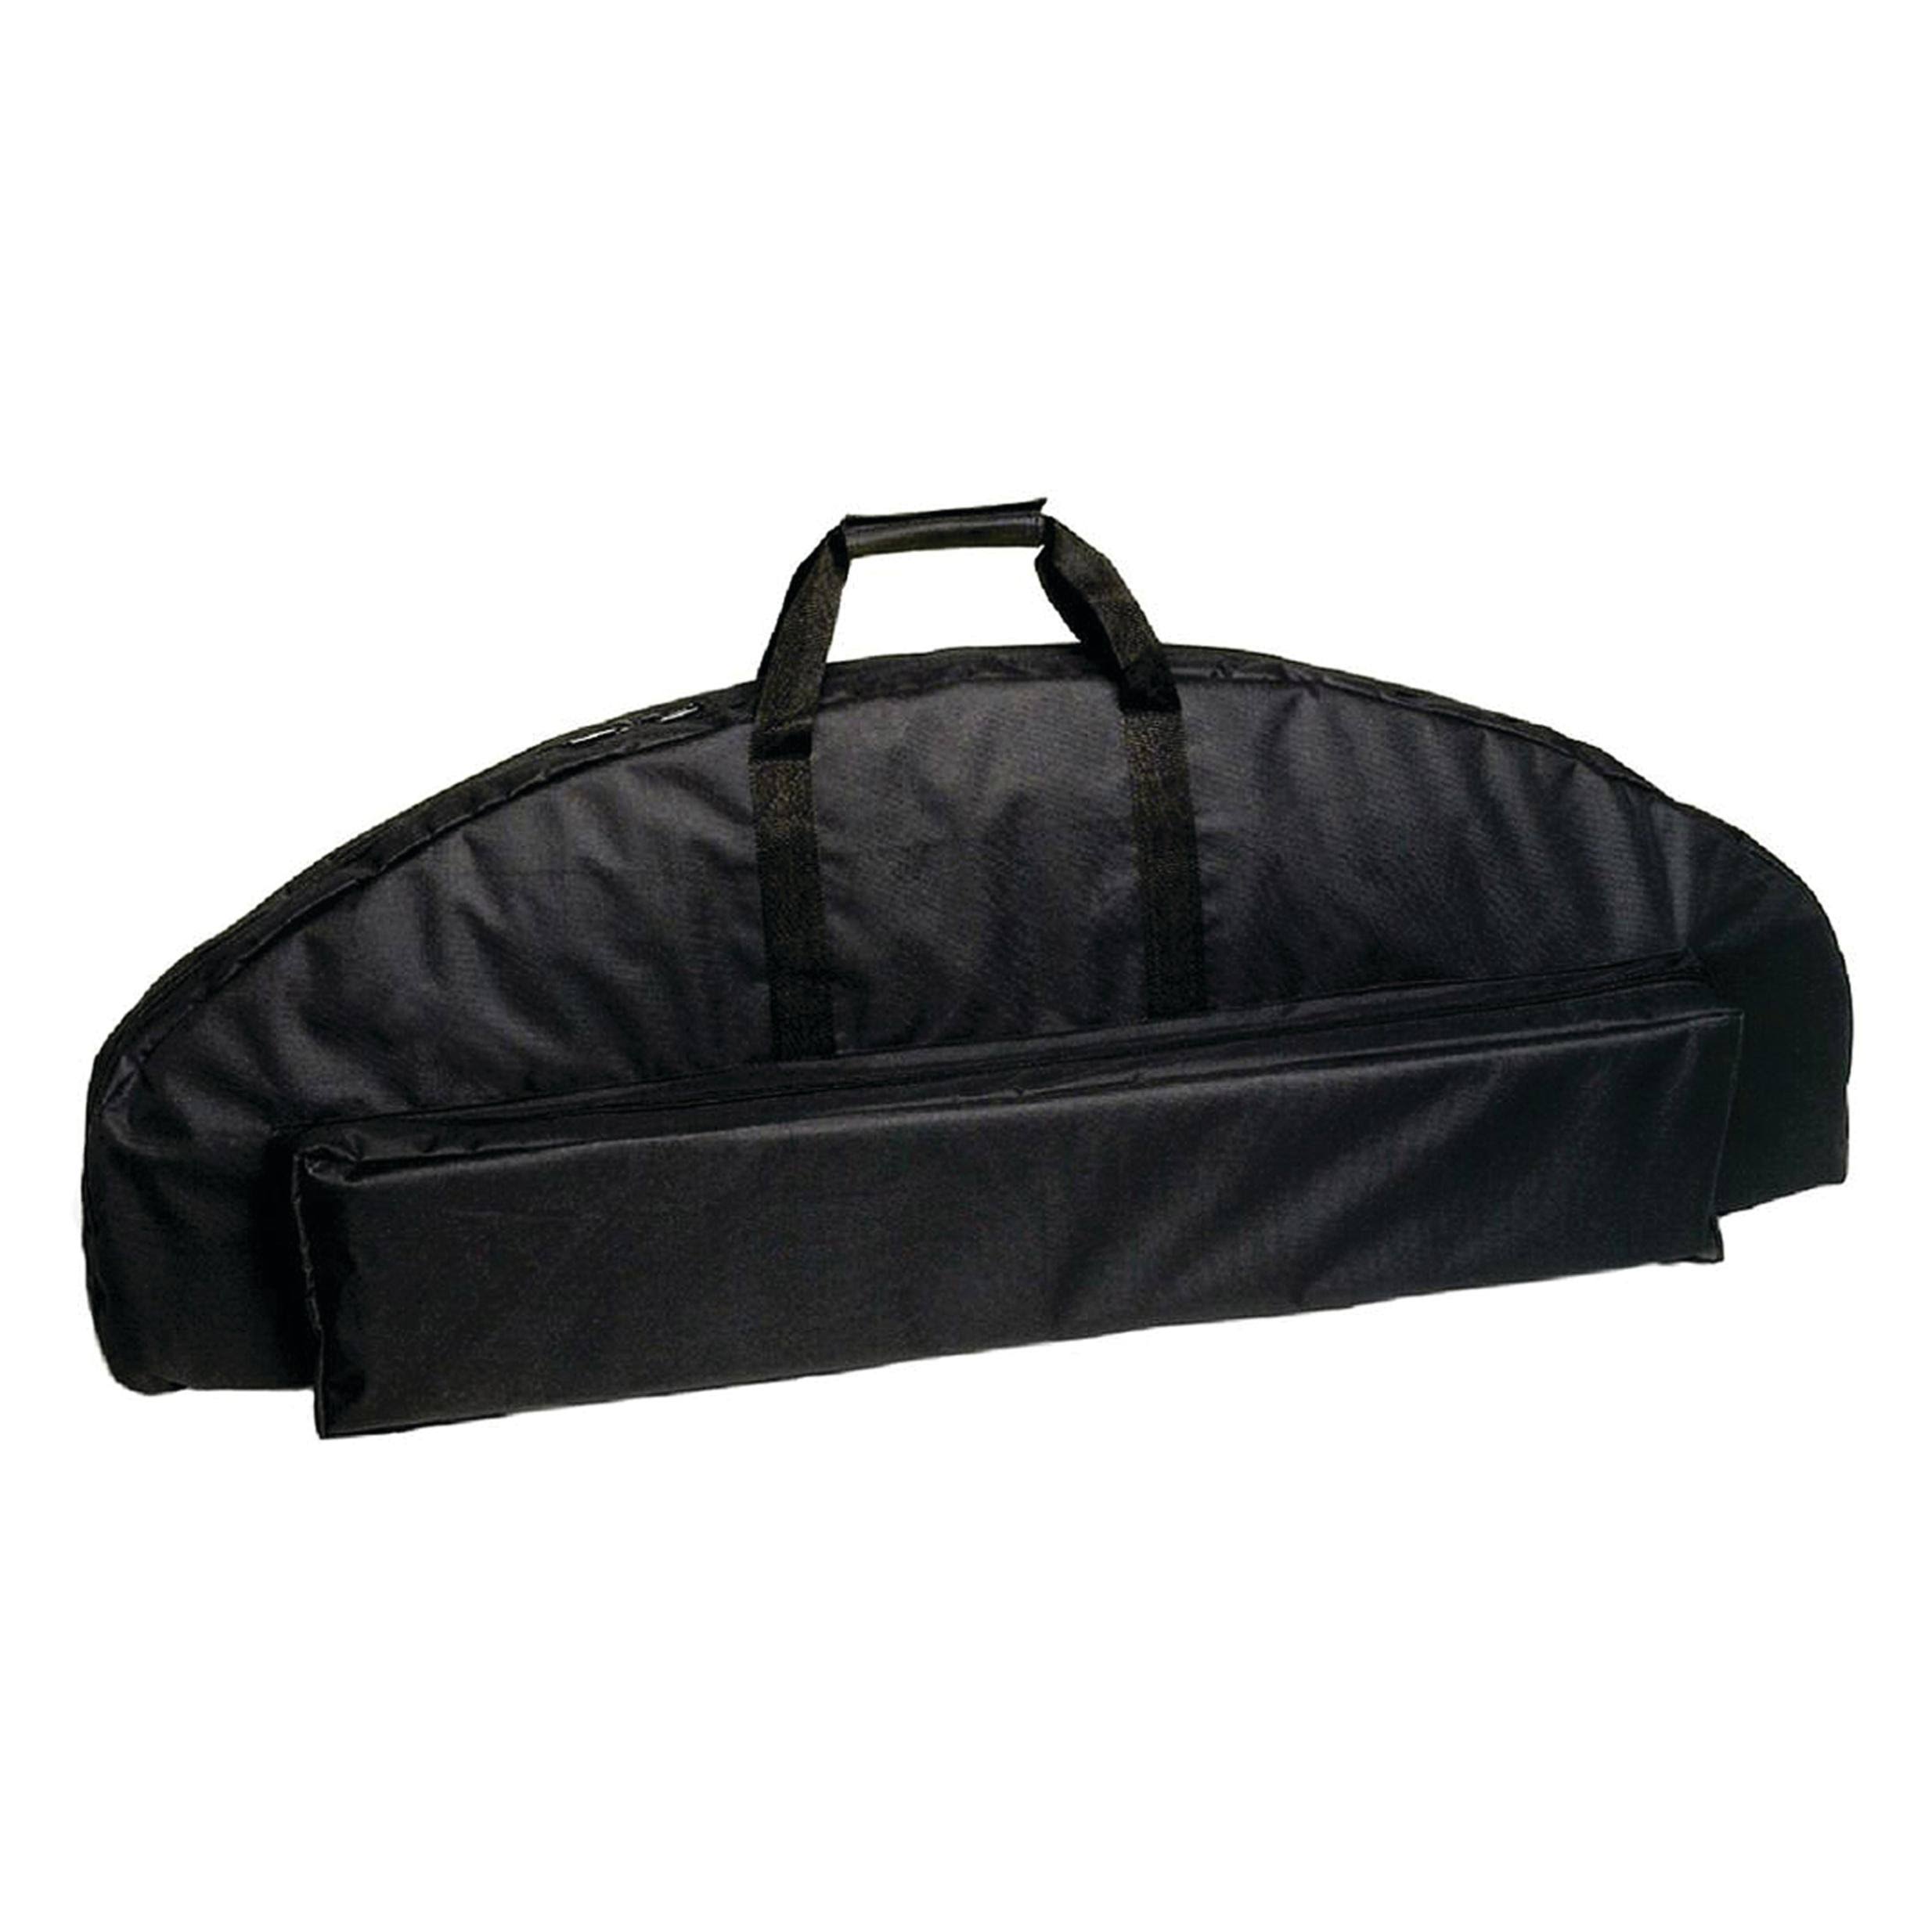 30 06 Outdoors Black Outdoors Economy Compound Soft Archery Bow Case - 46"